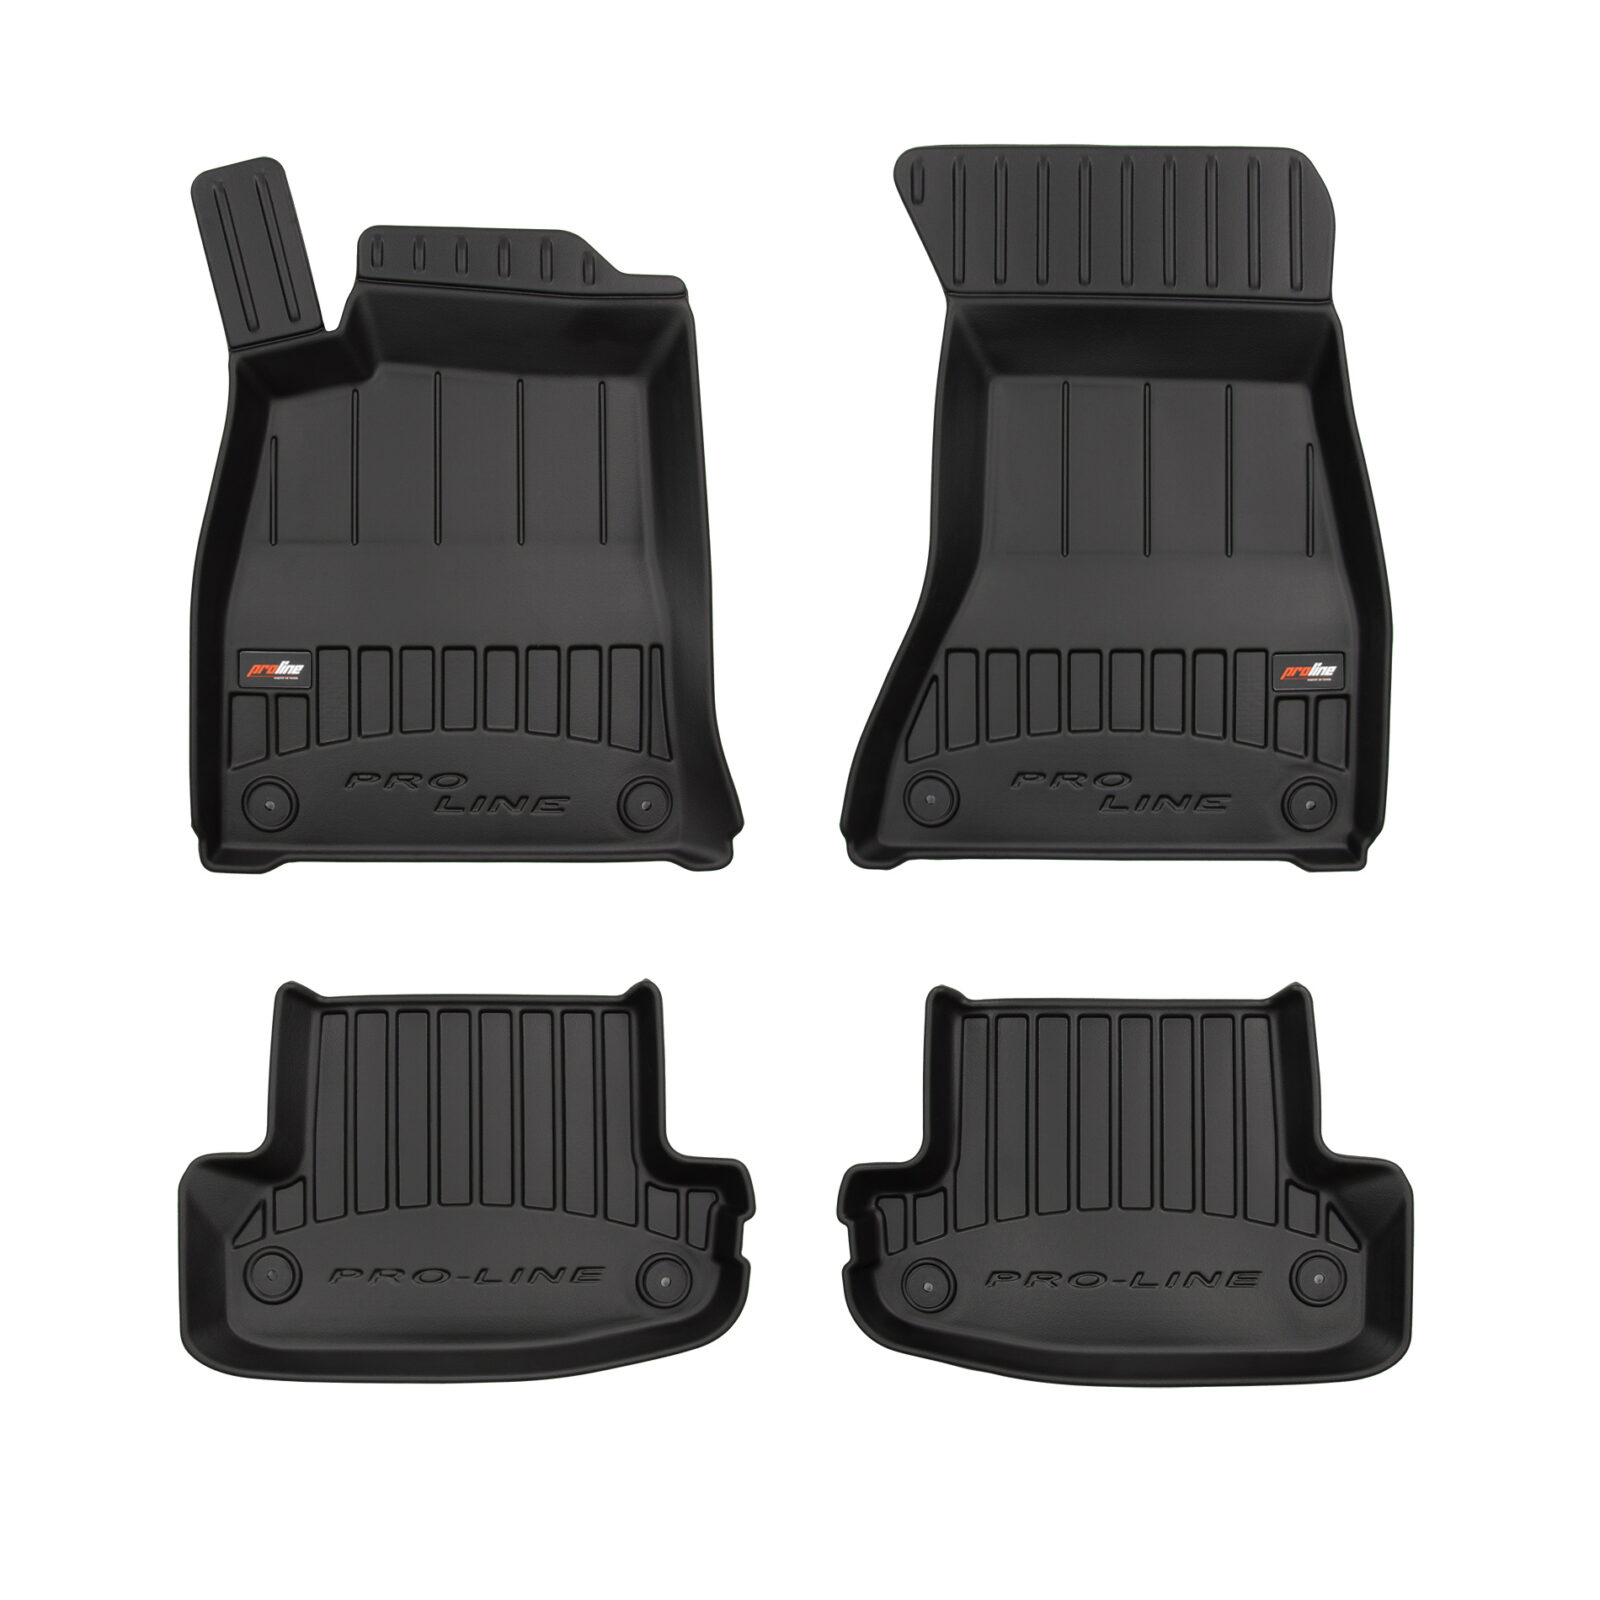 Car mats ProLine tailor-made for Audi A5 F5 since 2016